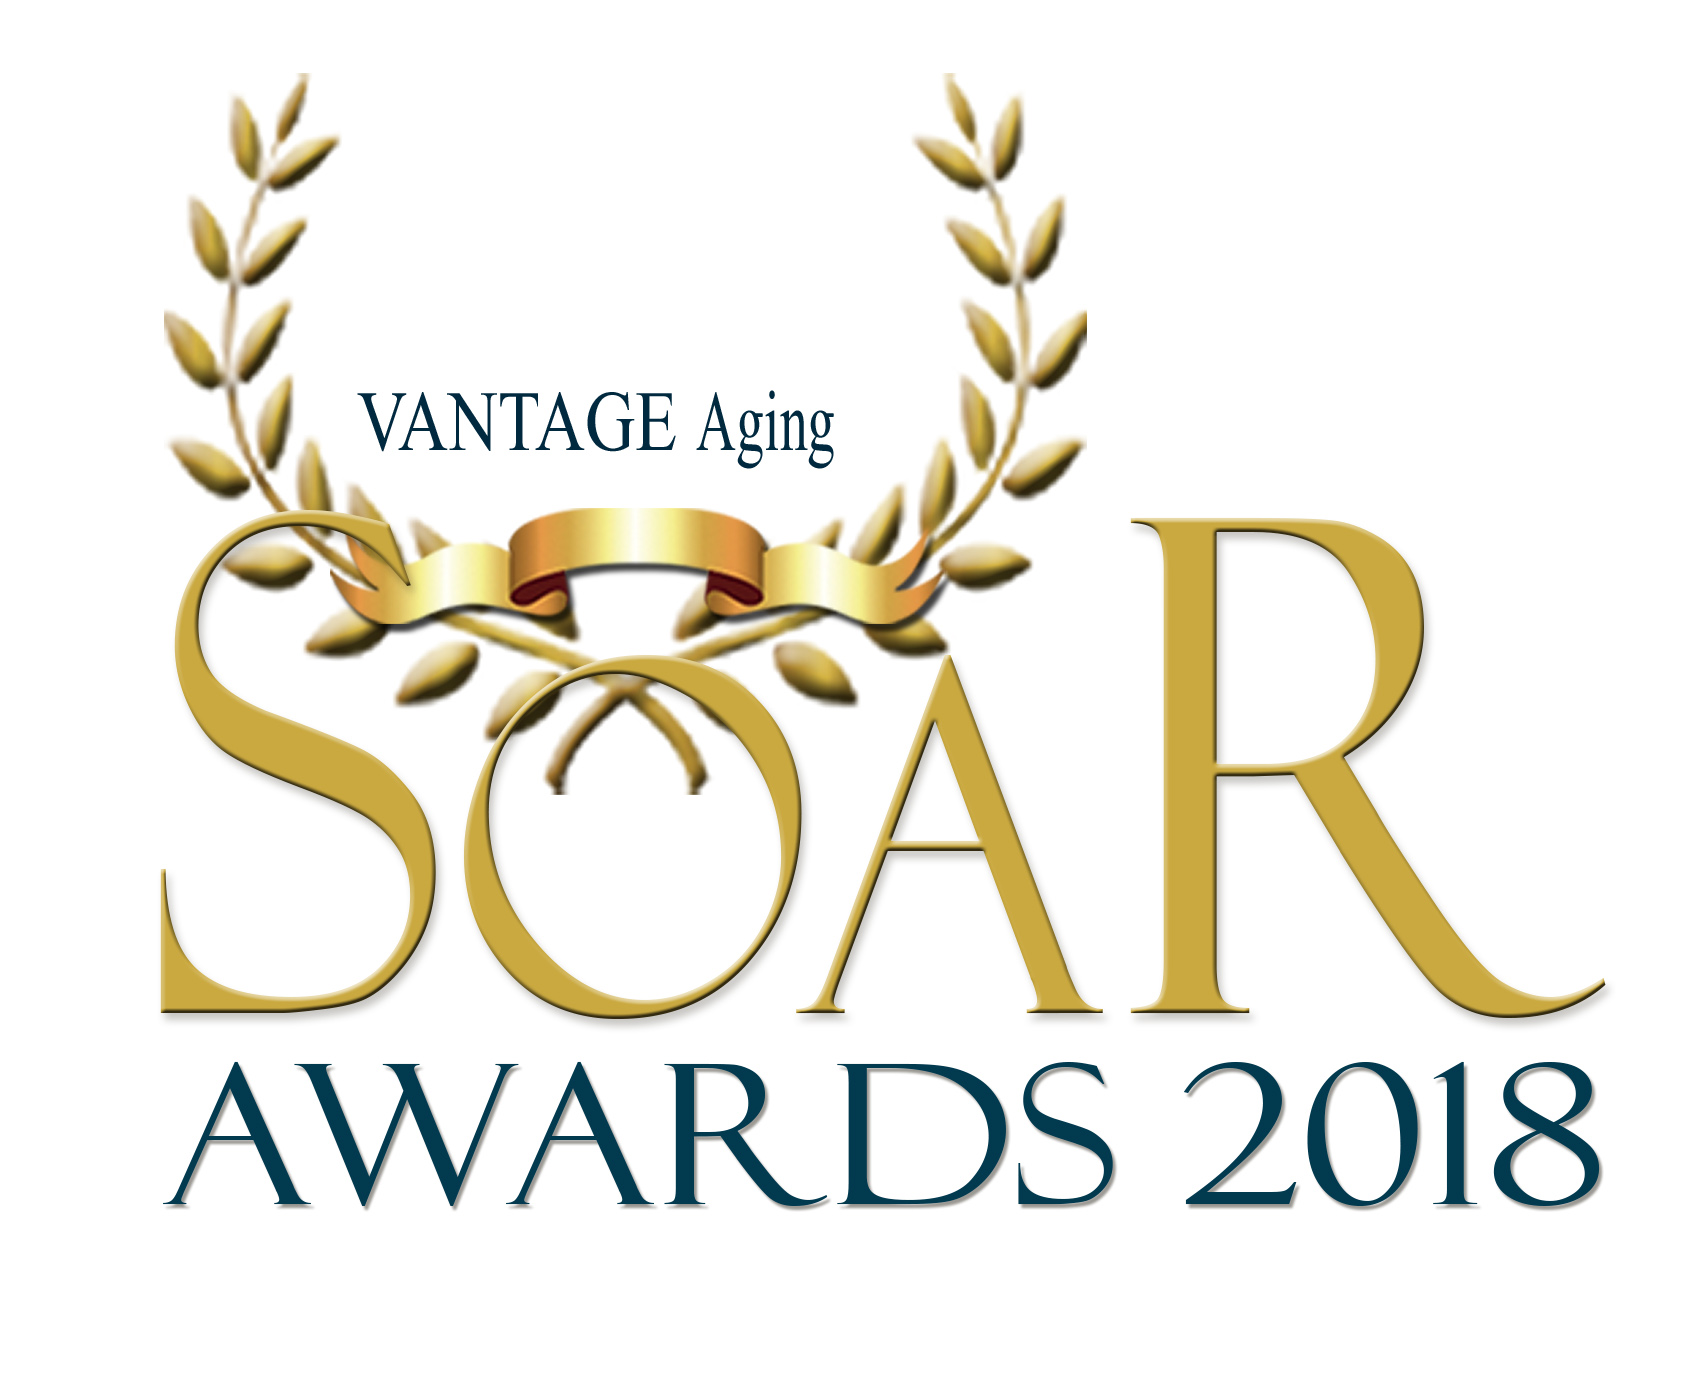 VANTAGE Aging Will Recognize Those Supporting Positive Aging in Summit County at 2018 SOAR Awards